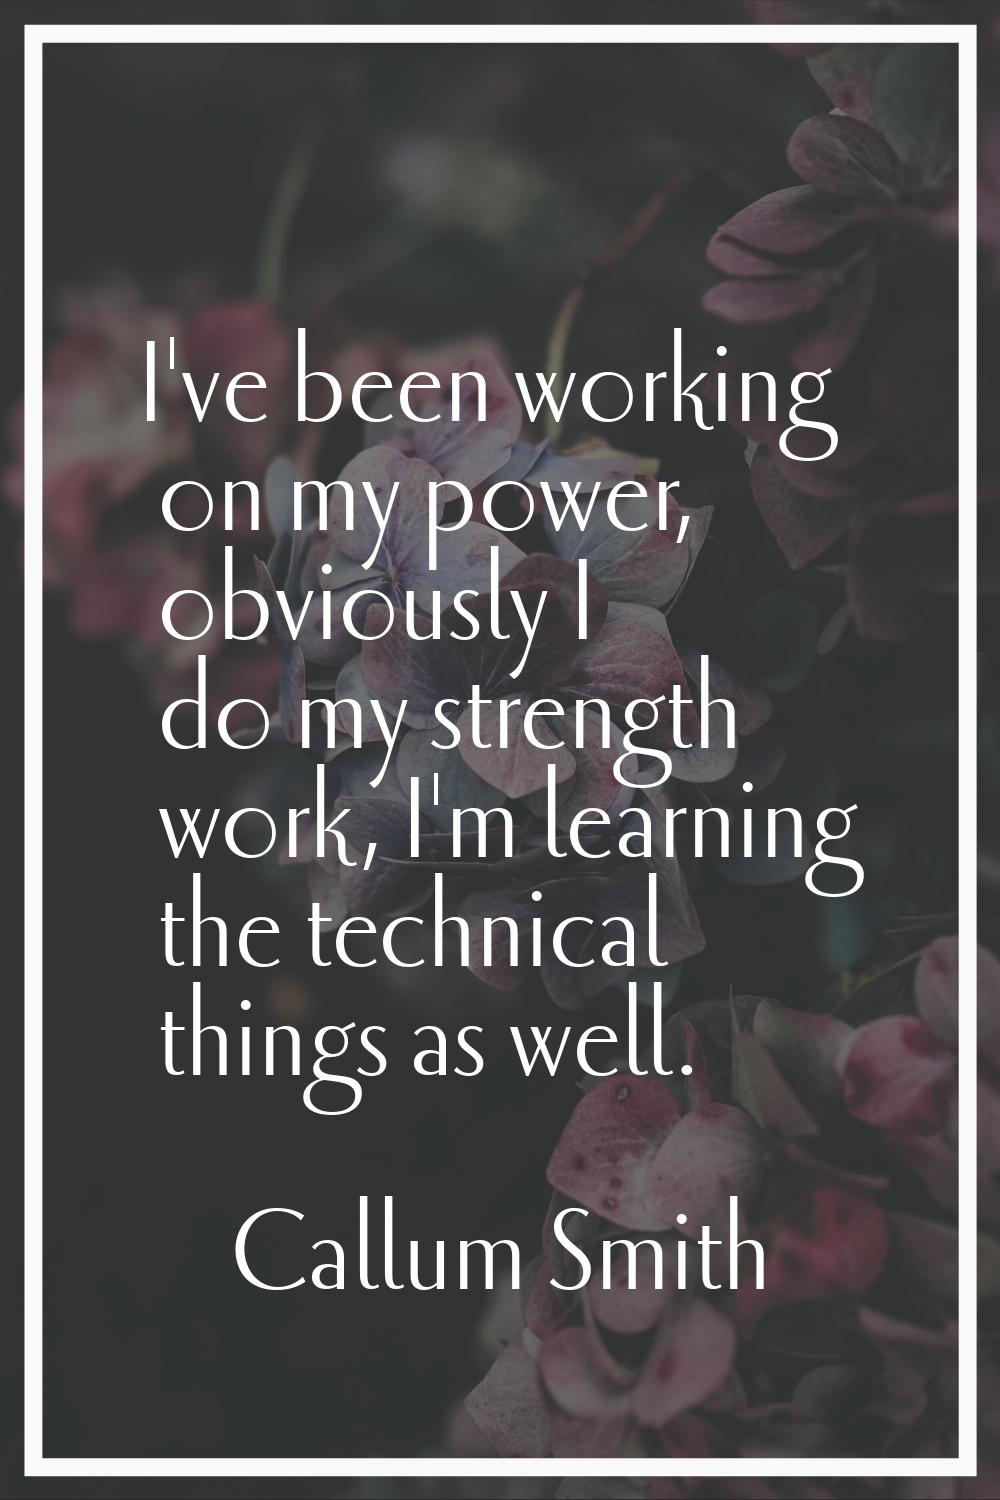 I've been working on my power, obviously I do my strength work, I'm learning the technical things a